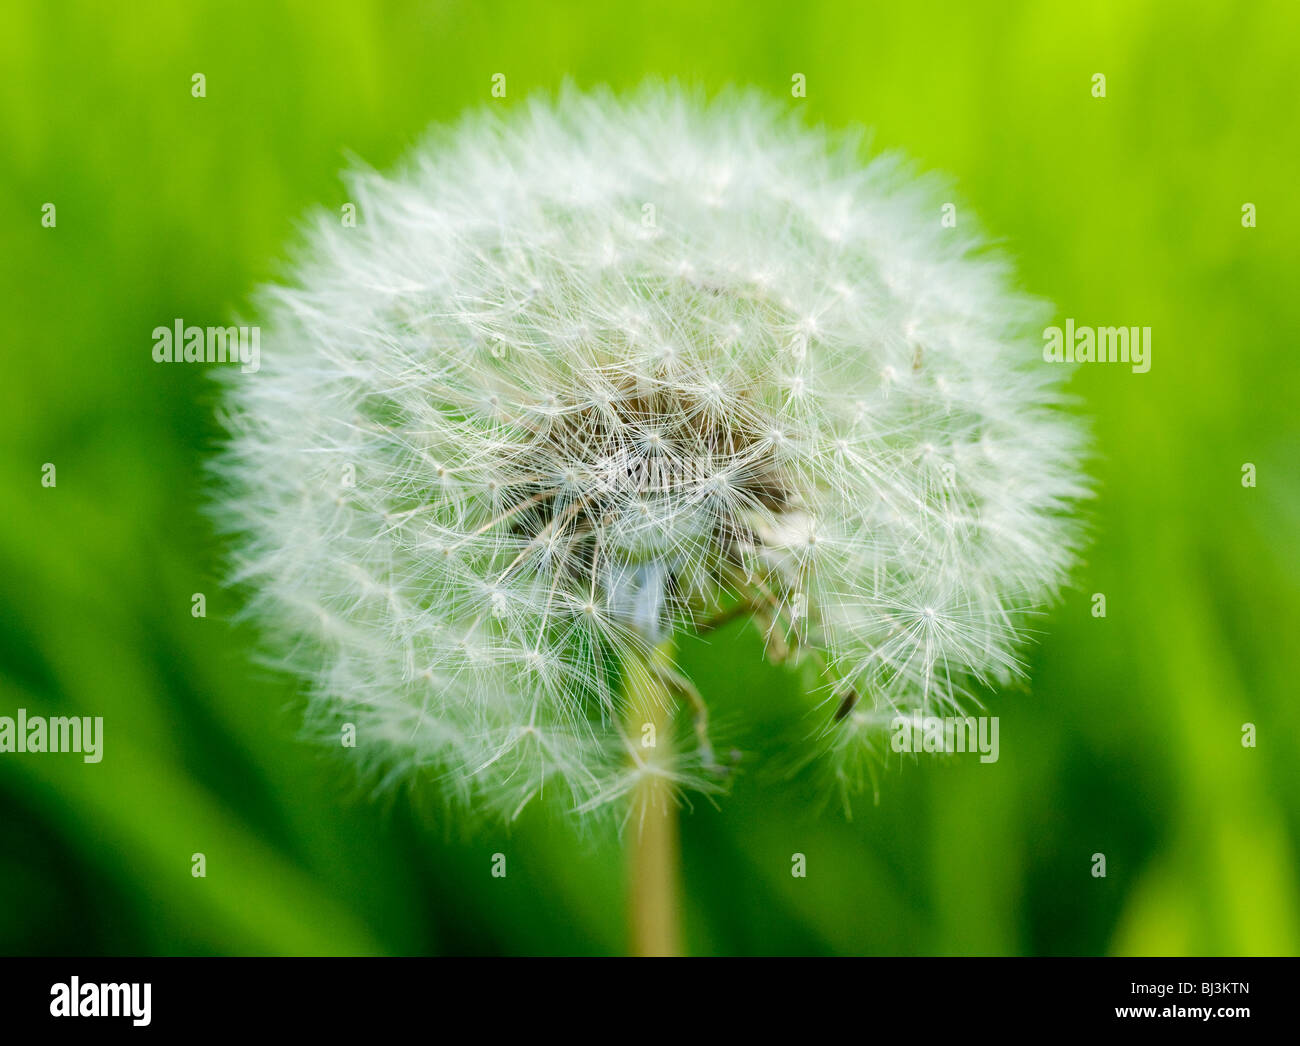 Dandelion seed head in big closeup against green grass background Stock Photo